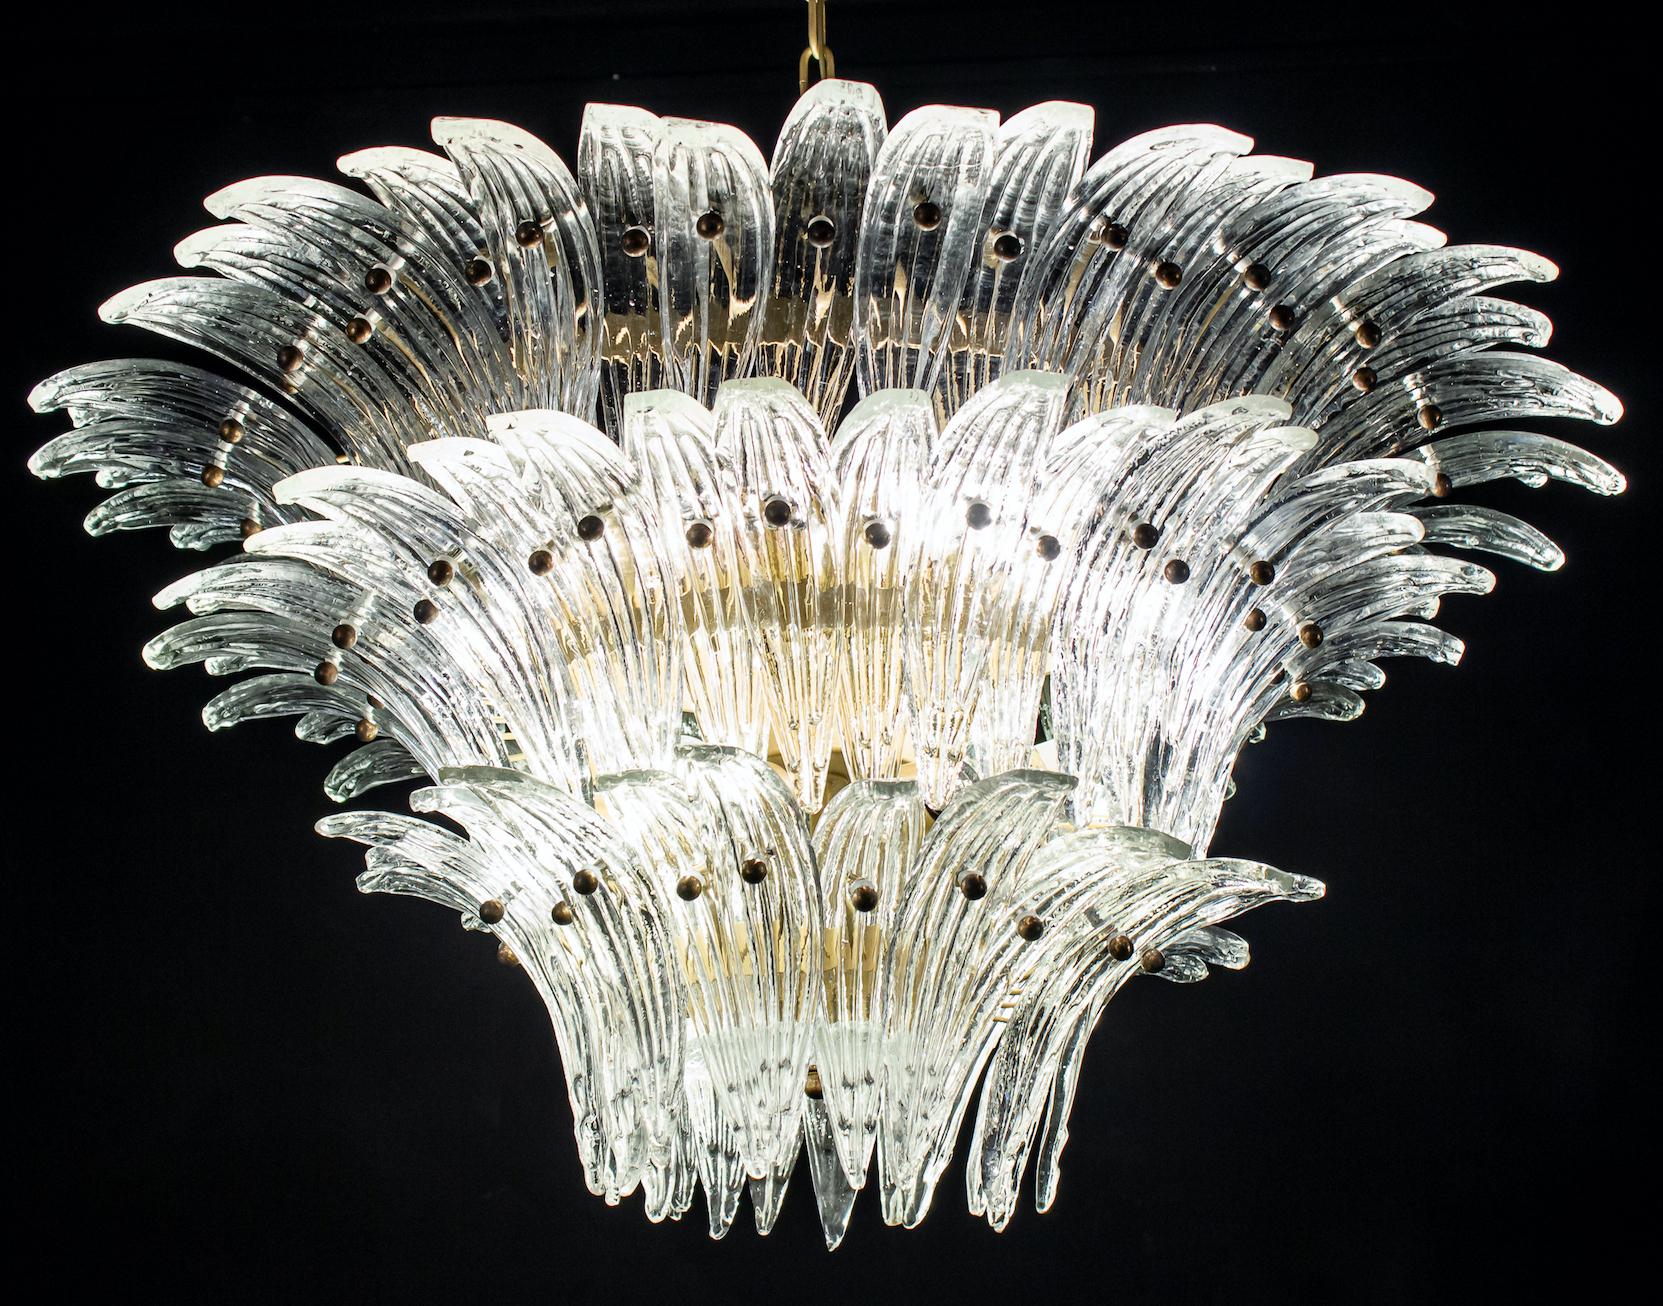 Luxury Palmette murano glass chandelier made with 94 original crystal glasses .
Bronze metal frame.
Available also a pair and a pair of sconces.
12-light bulbs, E27 dimension
Dimensions: Chandelier 43.30 inches (110 cm), height with chain. Without